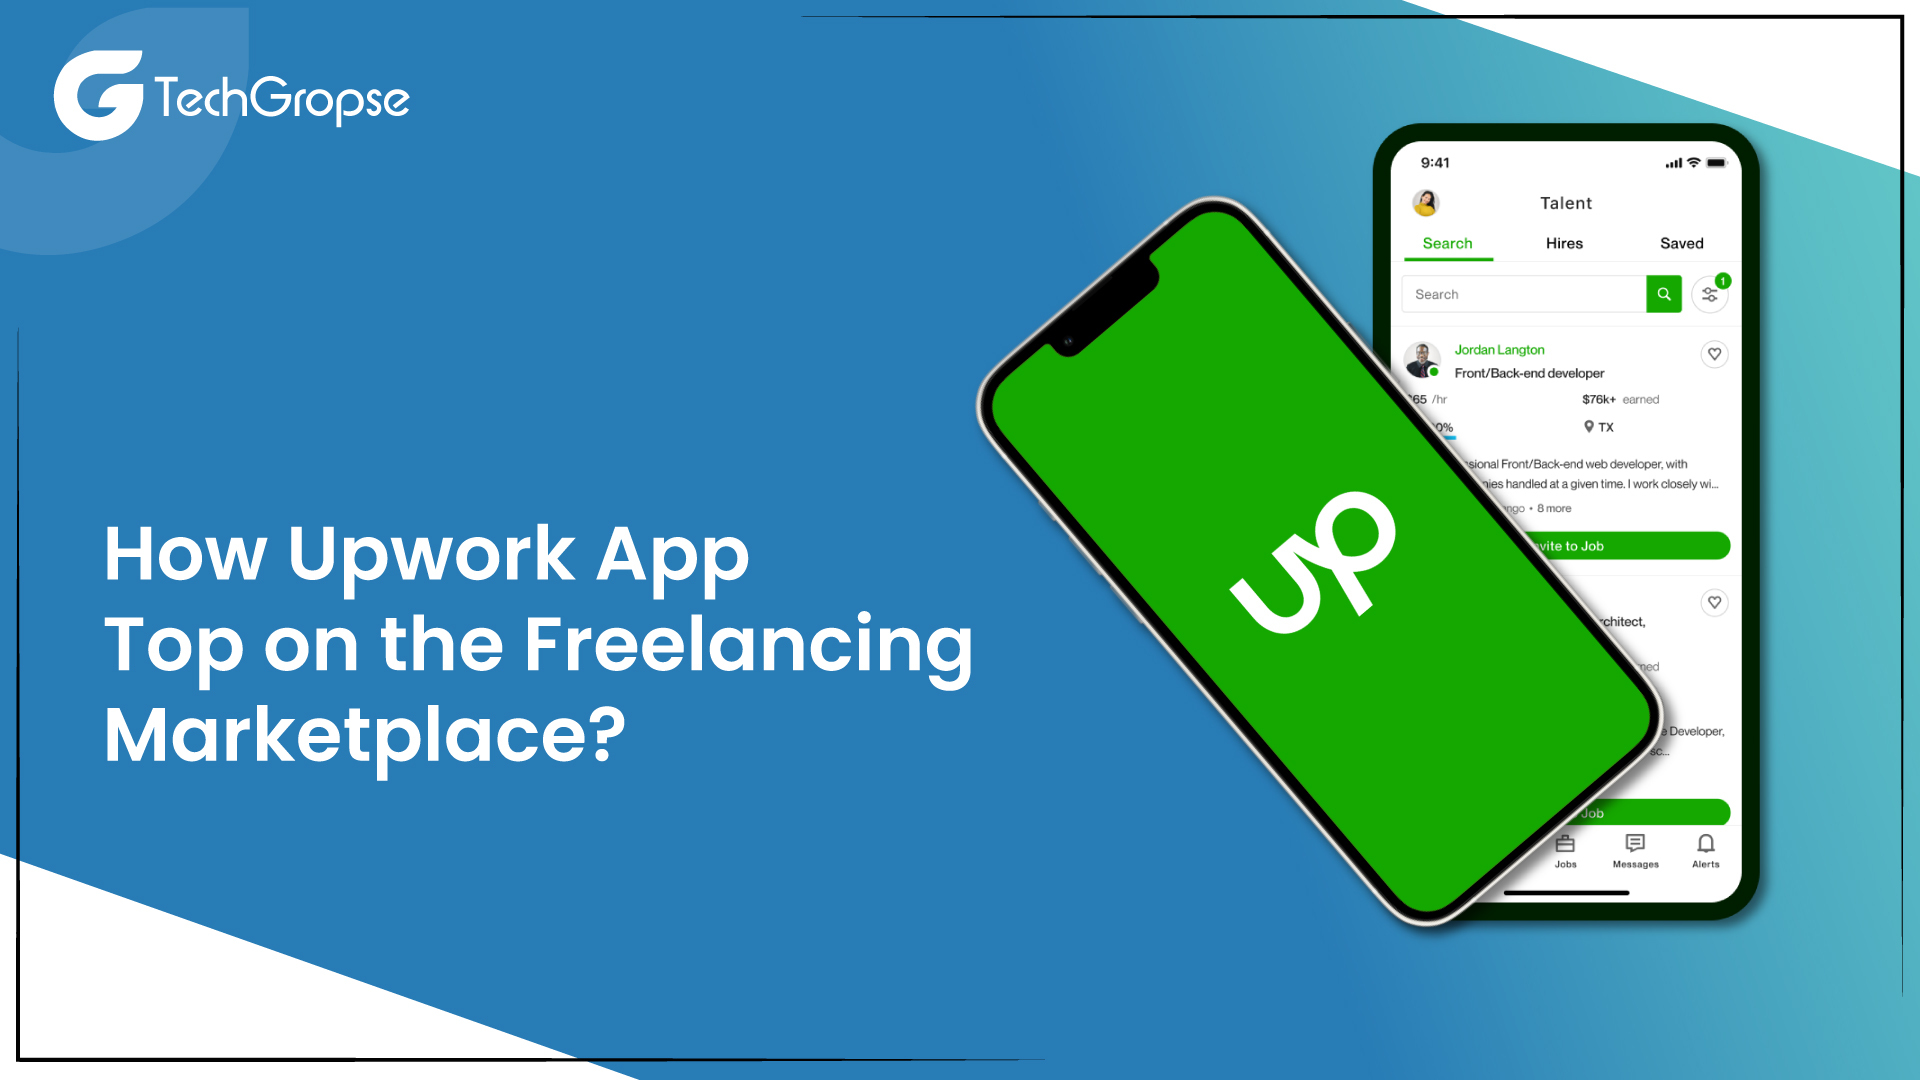 How Upwork App Top on the Freelancing Marketplace?